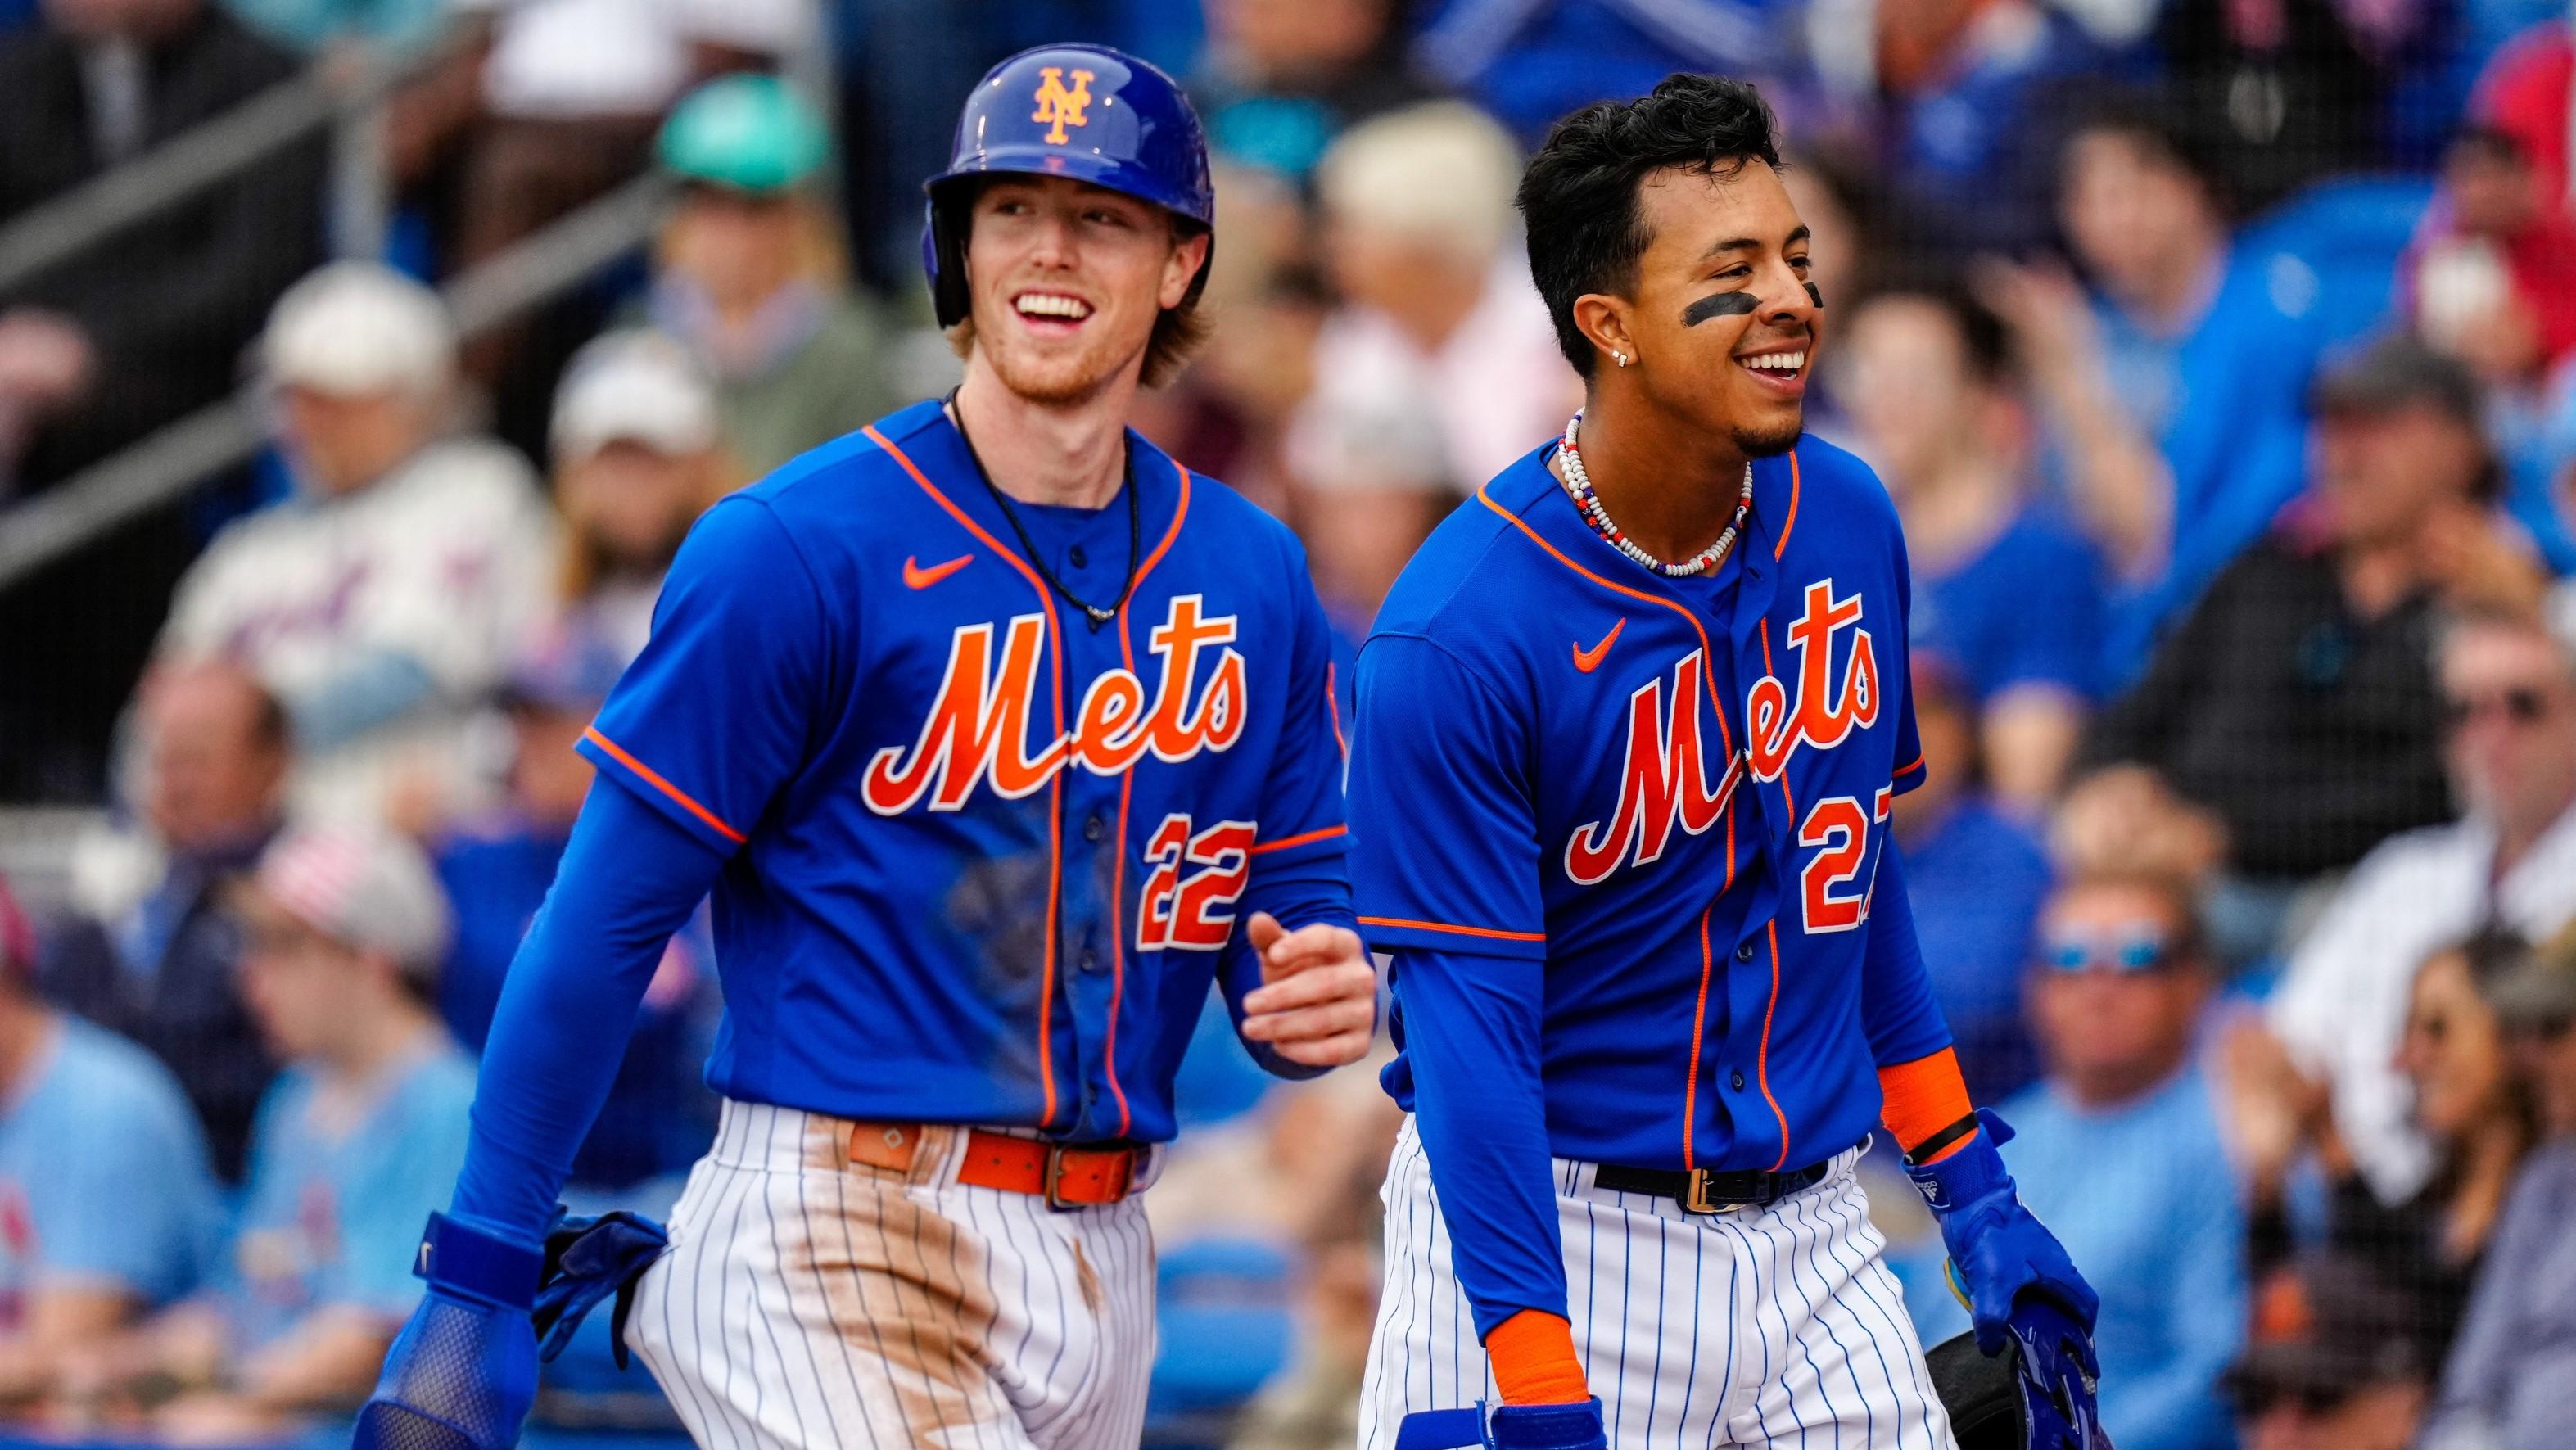 Mar 19, 2023; Port St. Lucie, Florida, USA; New York Mets third baseman Brett Baty (22) and New York Mets first baseman Mark Vientos (27) walk back to the dugout after running home against the St. Louis Cardinals during the first inning at Clover Park. / Rich Storry-USA TODAY Sports